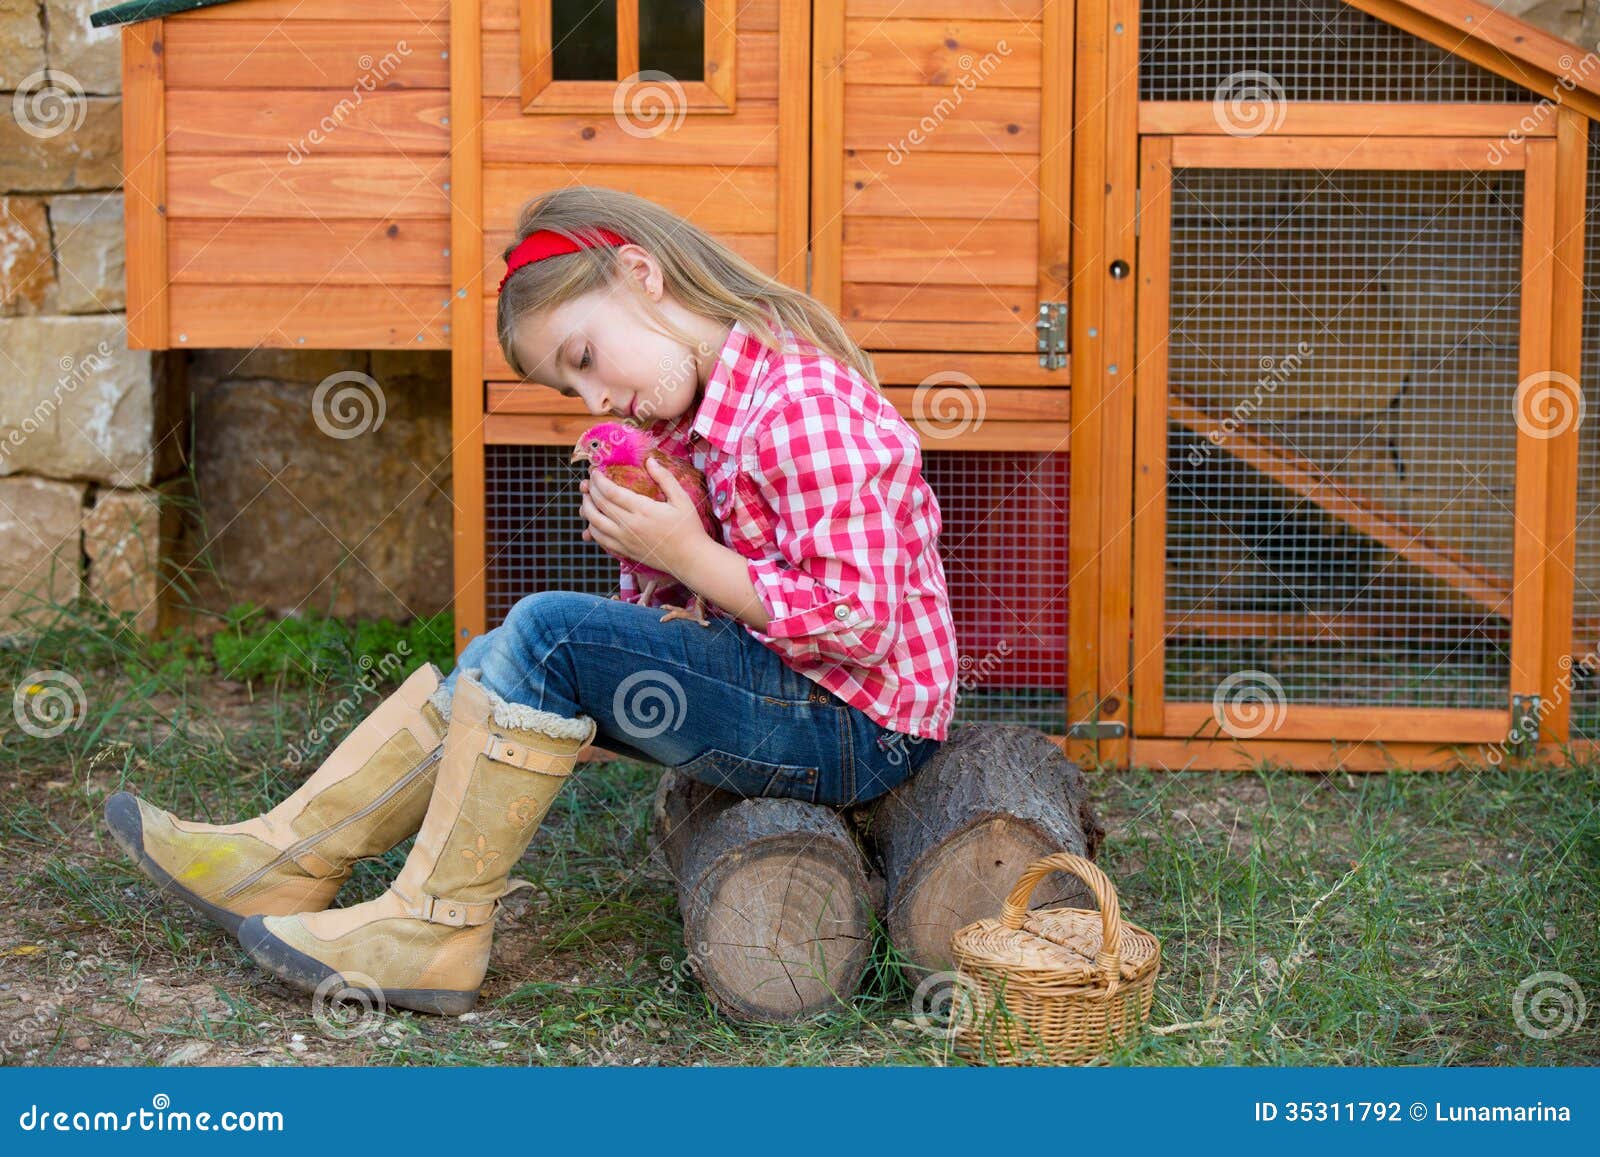 ... Farmer With Chicks In Chicken Coop Stock Photography - Image: 35311792